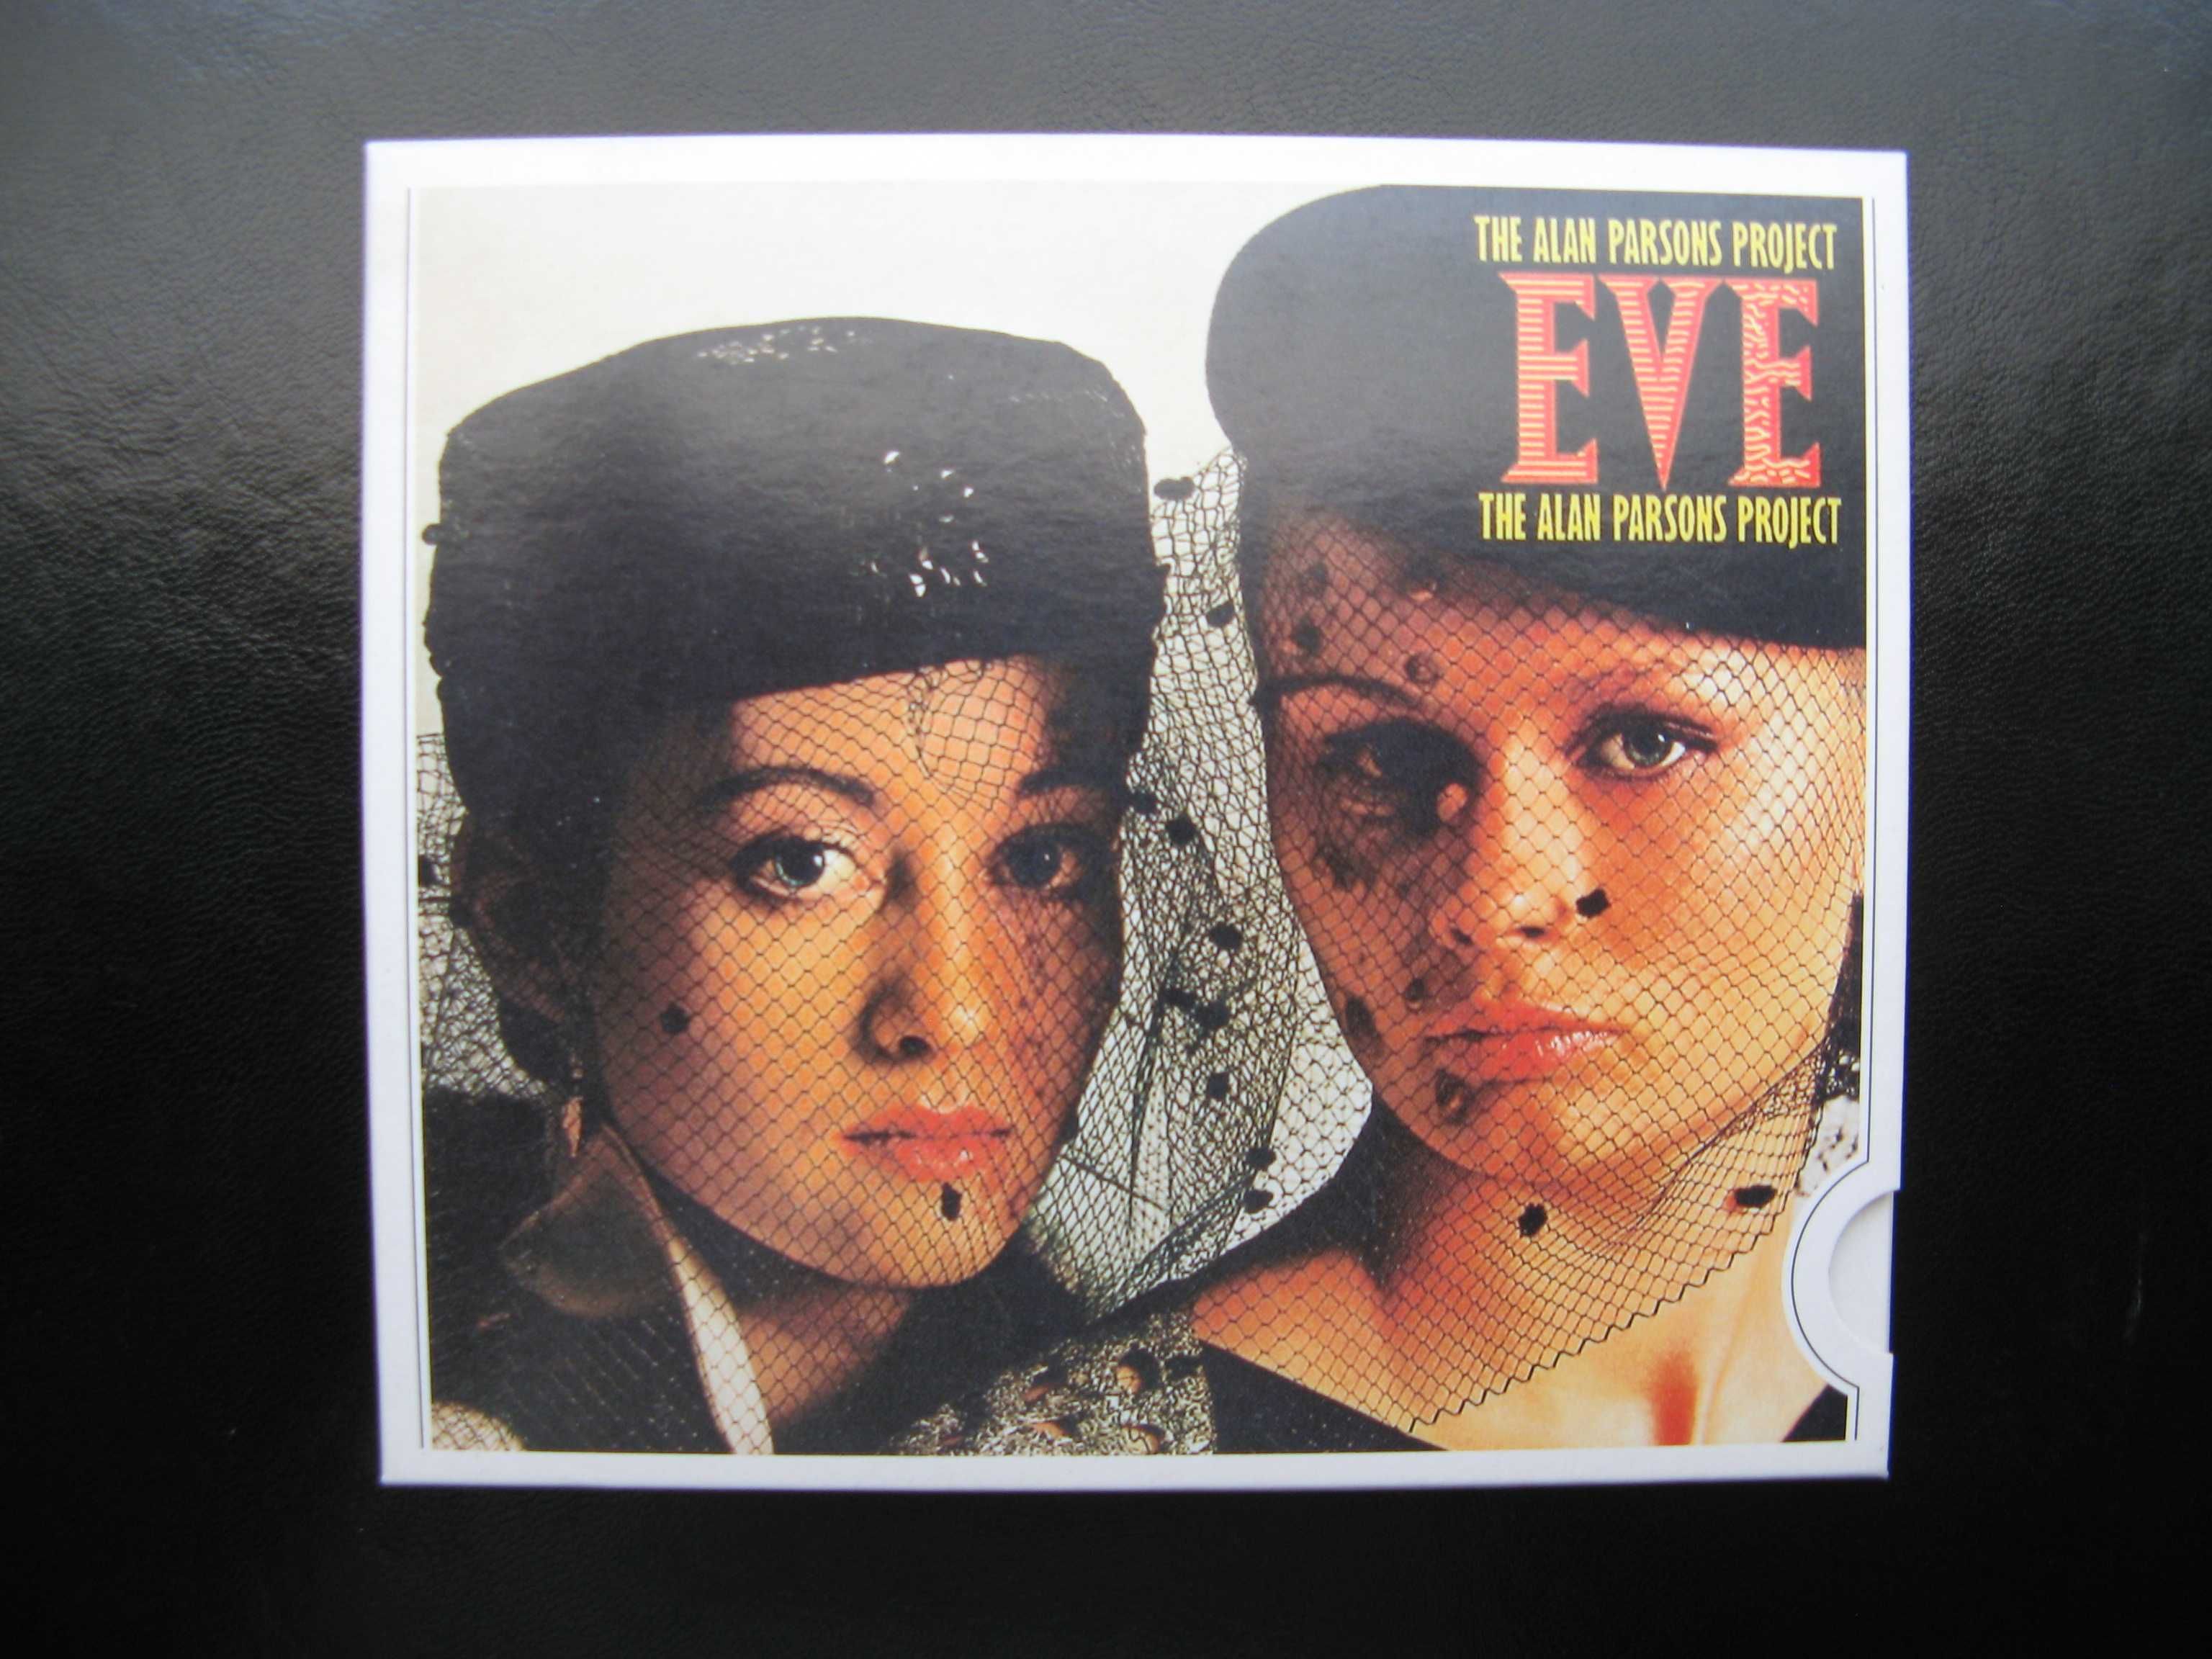 CD: The Alan Parsons Project - Eve